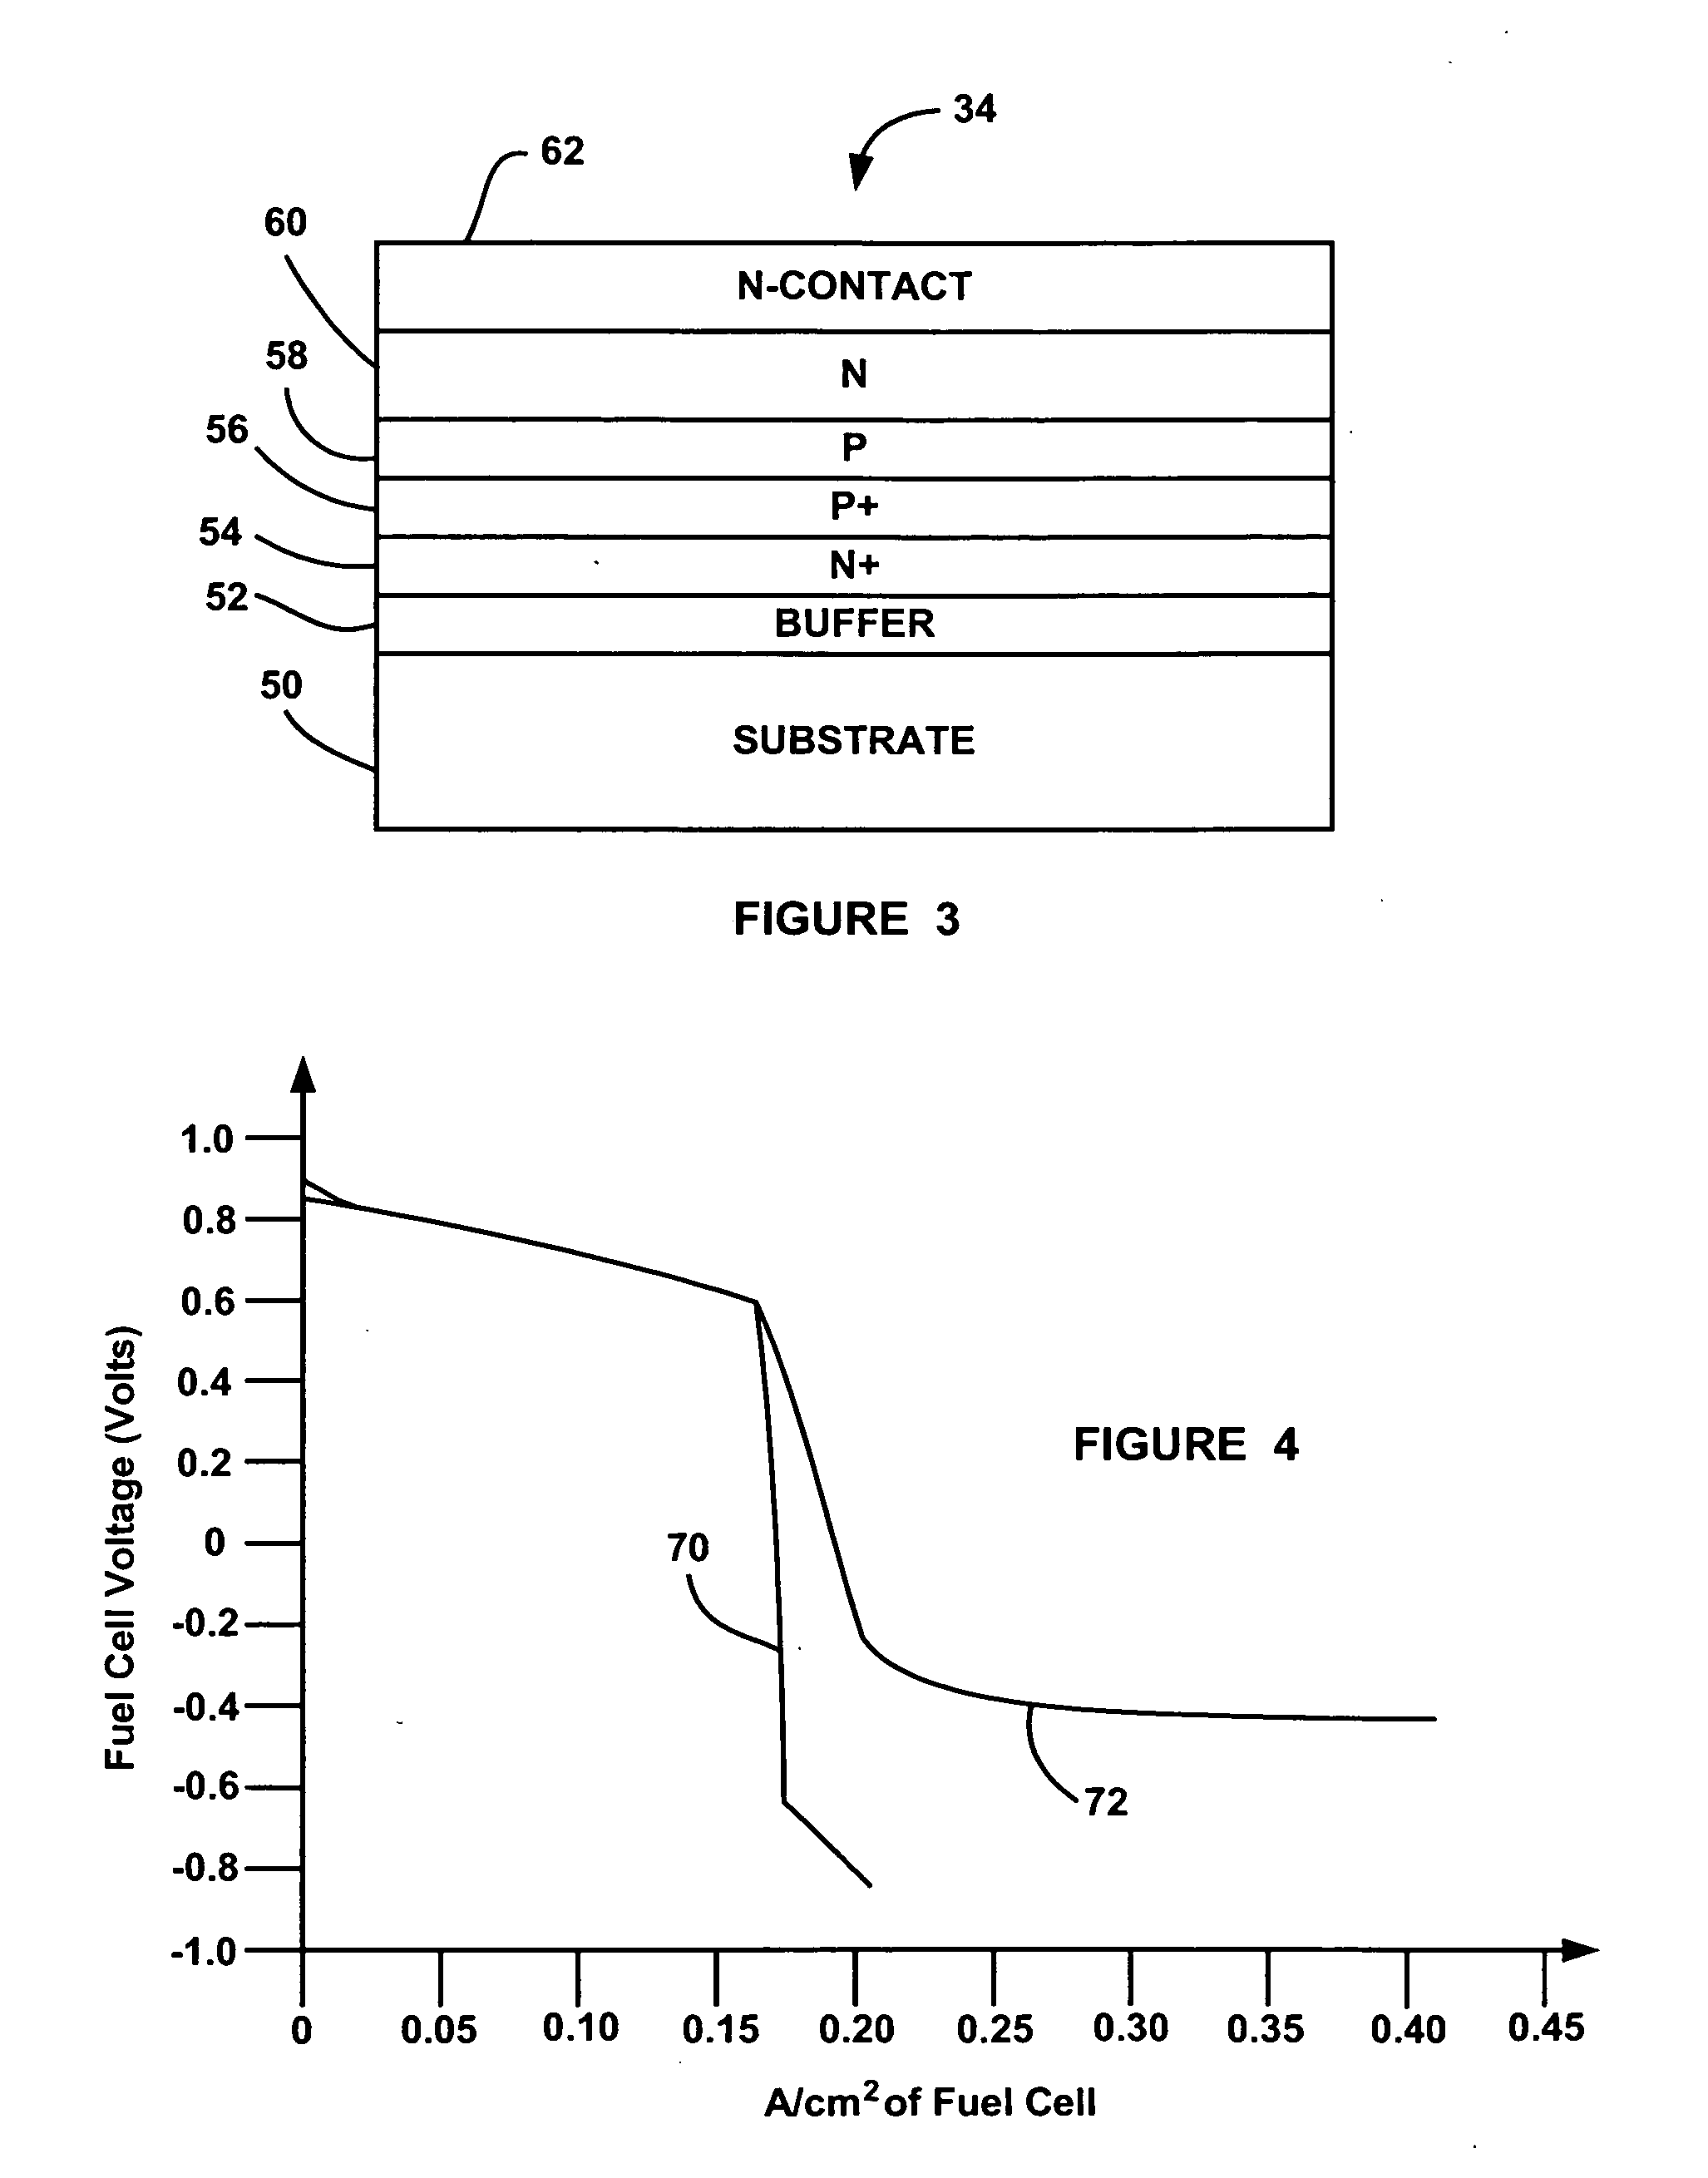 Integration of an electrical diode within a fuel cell